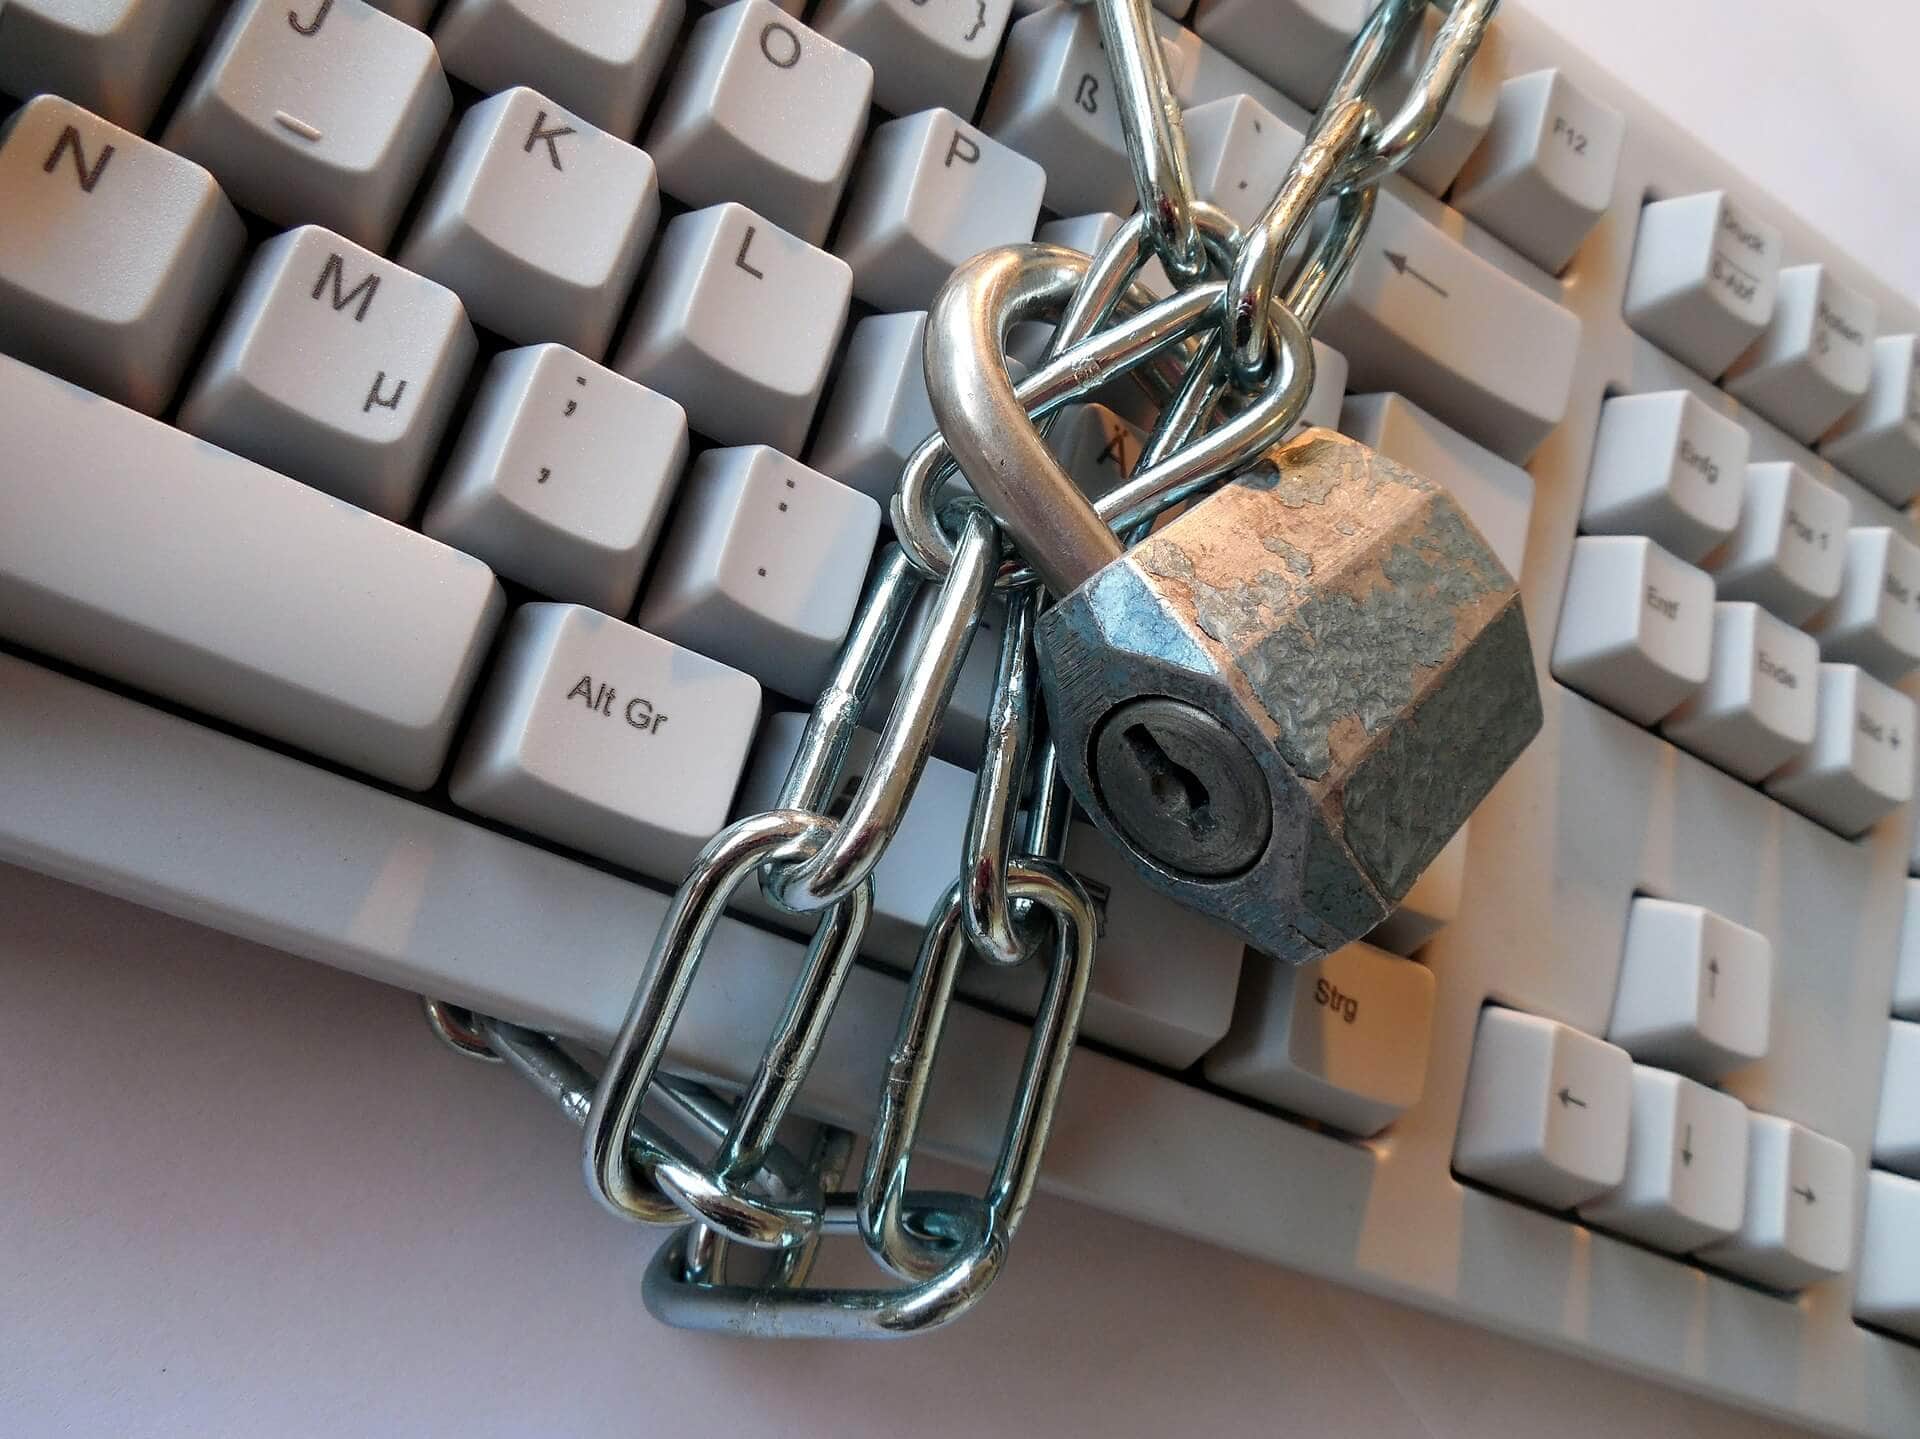 How to defend against security breaches